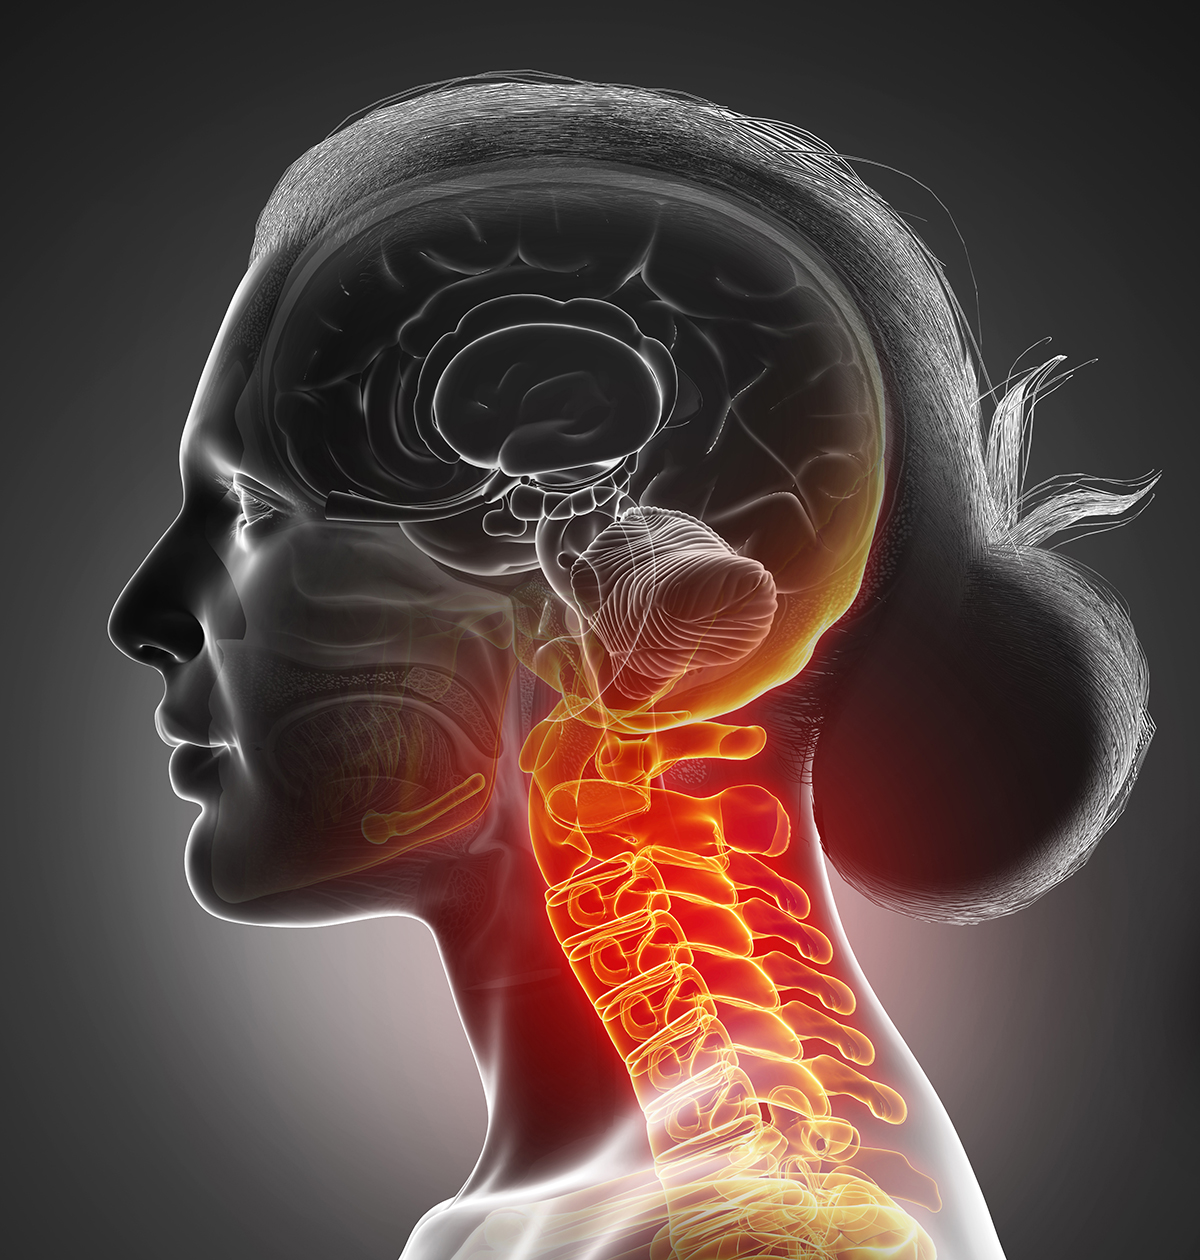 Transparent profile of a person, with the spinal cord glowing in red